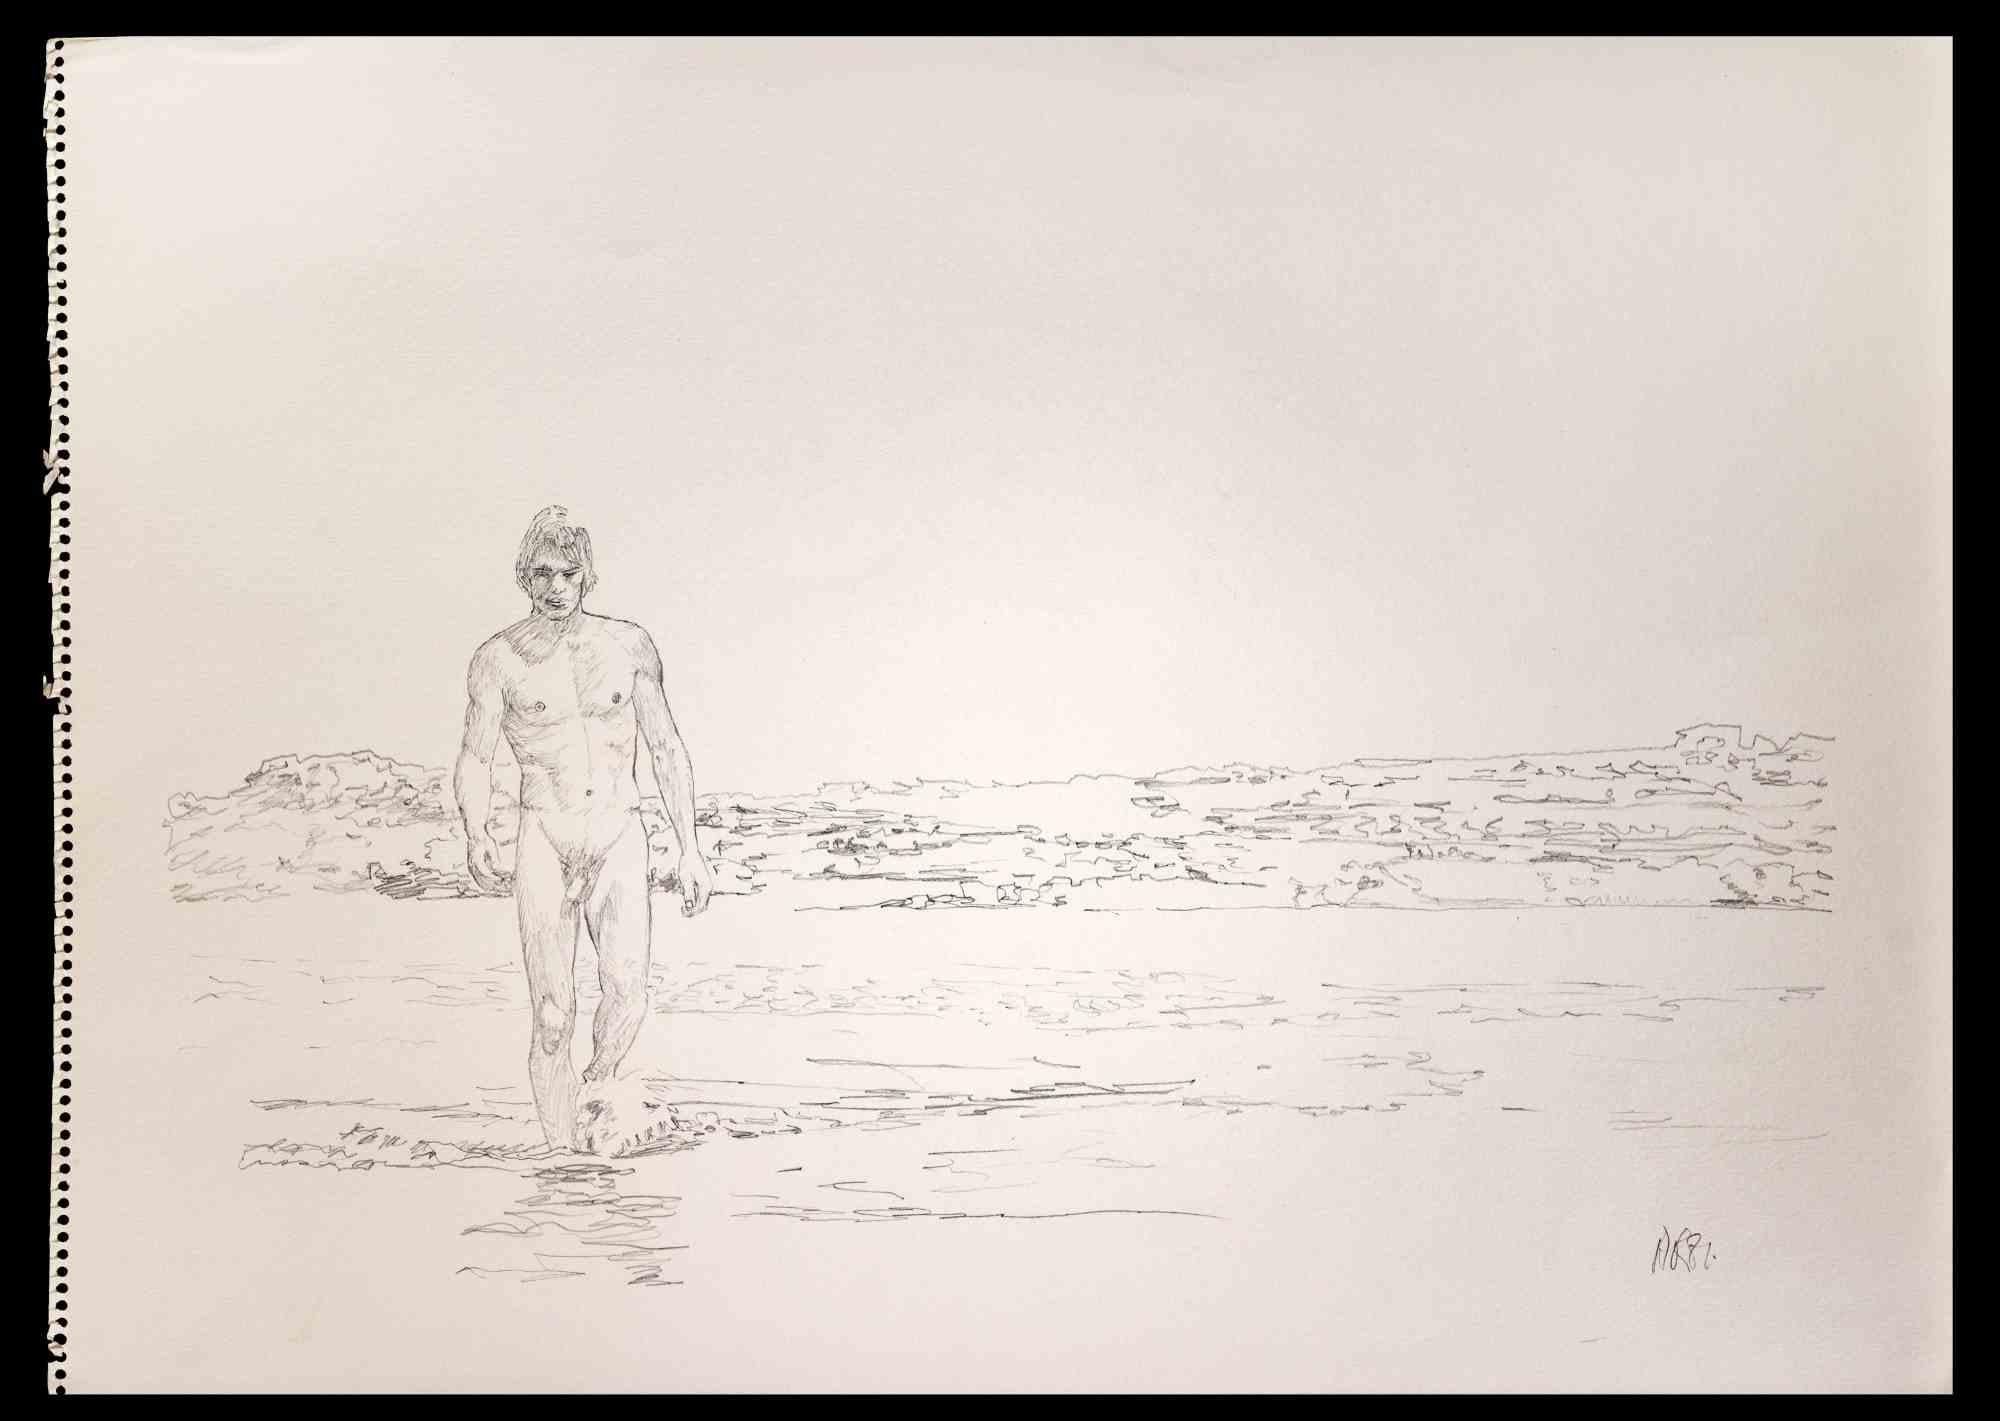 Man Walking on the Beach - Original Drawing by Anthony Roaland - 1981